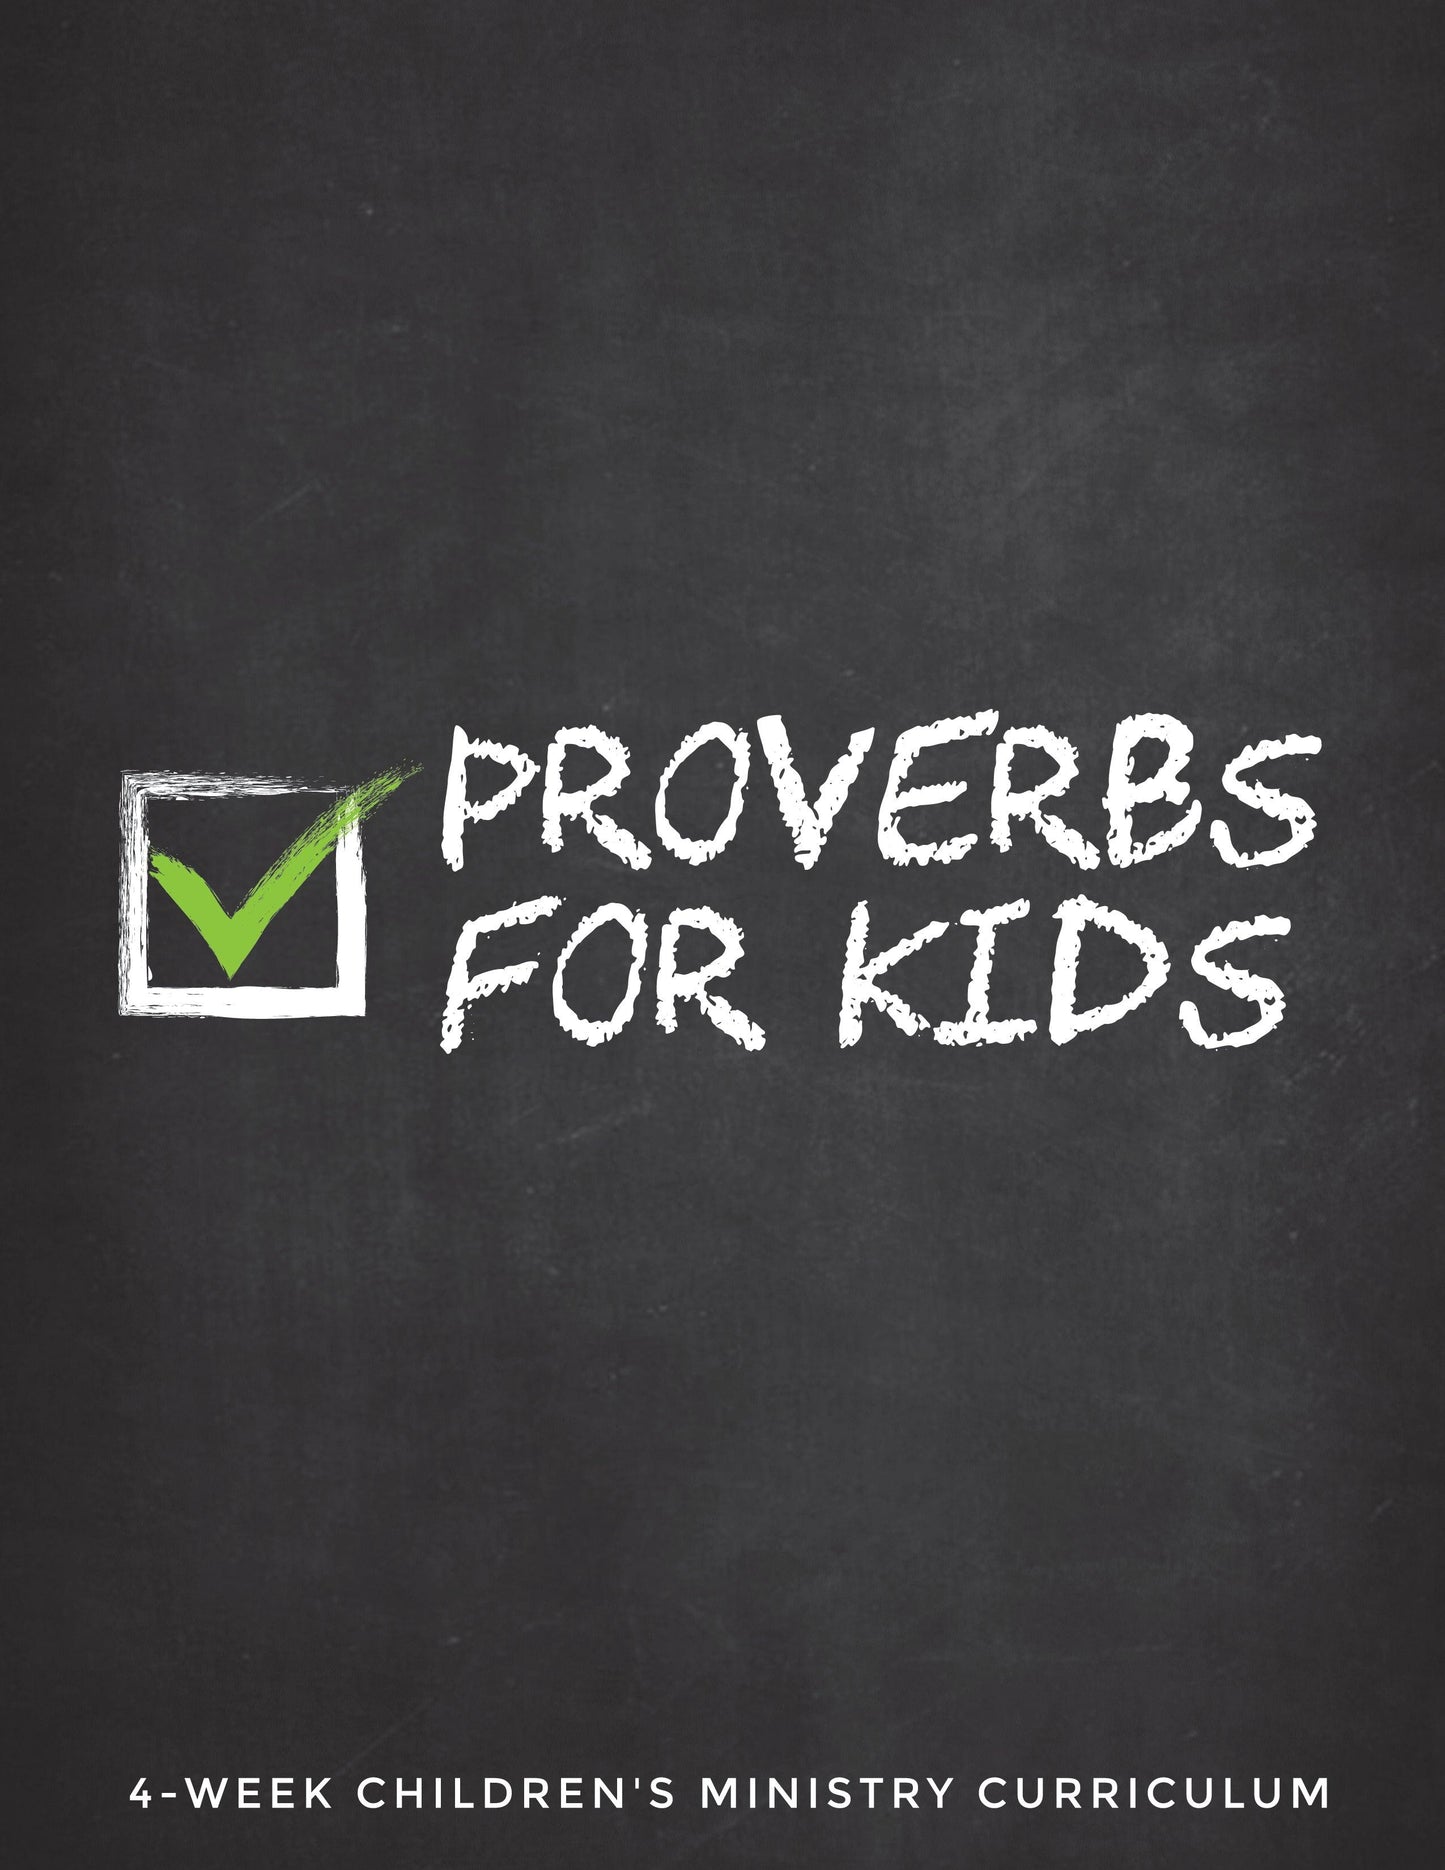 Proverbs for Kids 4-Week Children’s Ministry Curriculum - Sunday School Store 